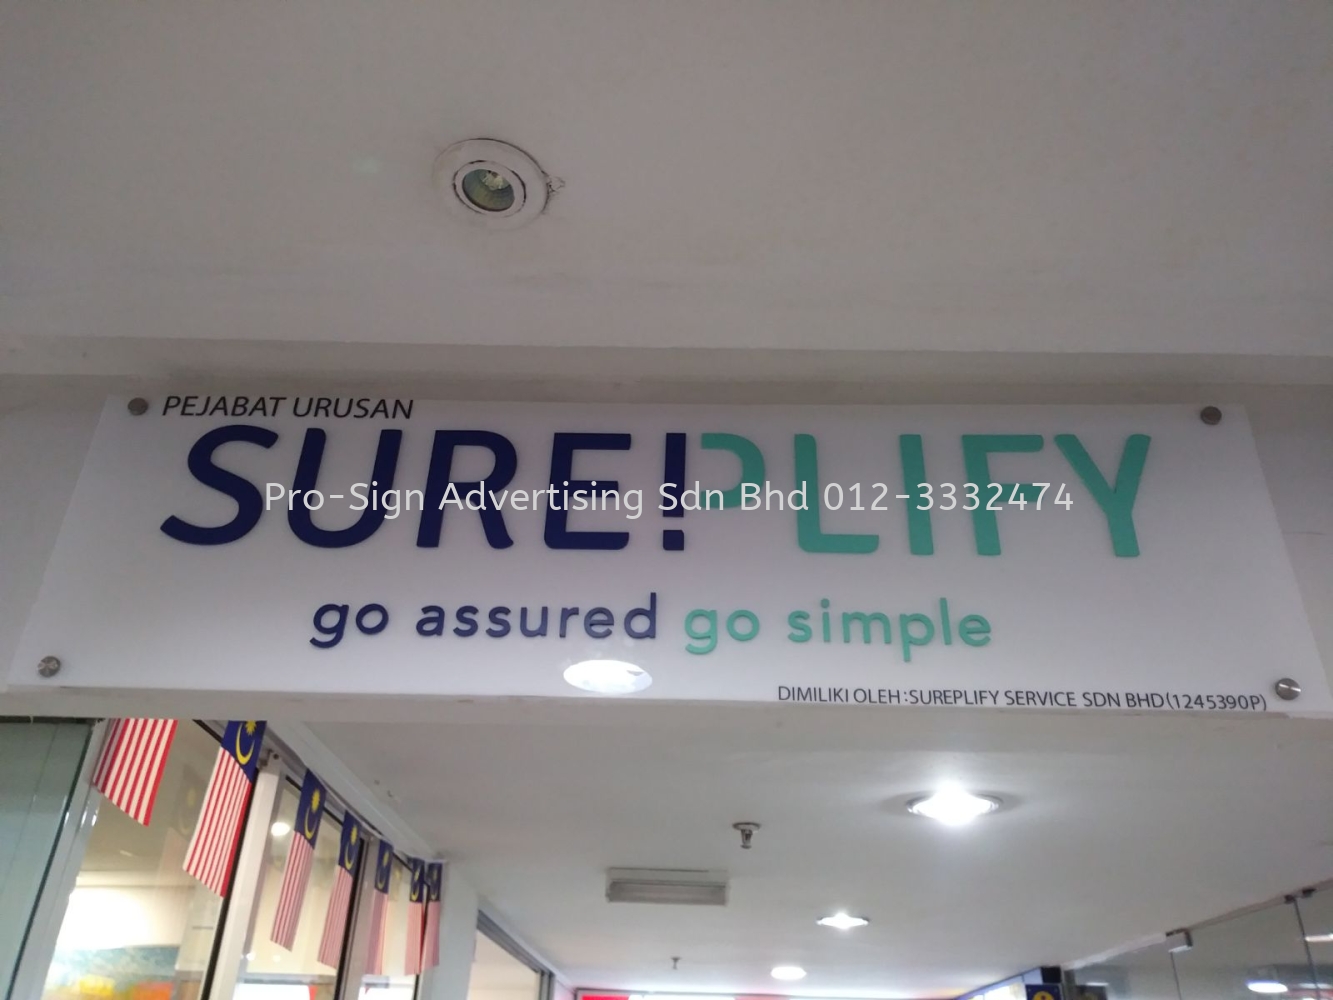 ACRYLIC CUT OUT LETTERING AND PANEL (SUREPLIFY, AMPANG, 2017)